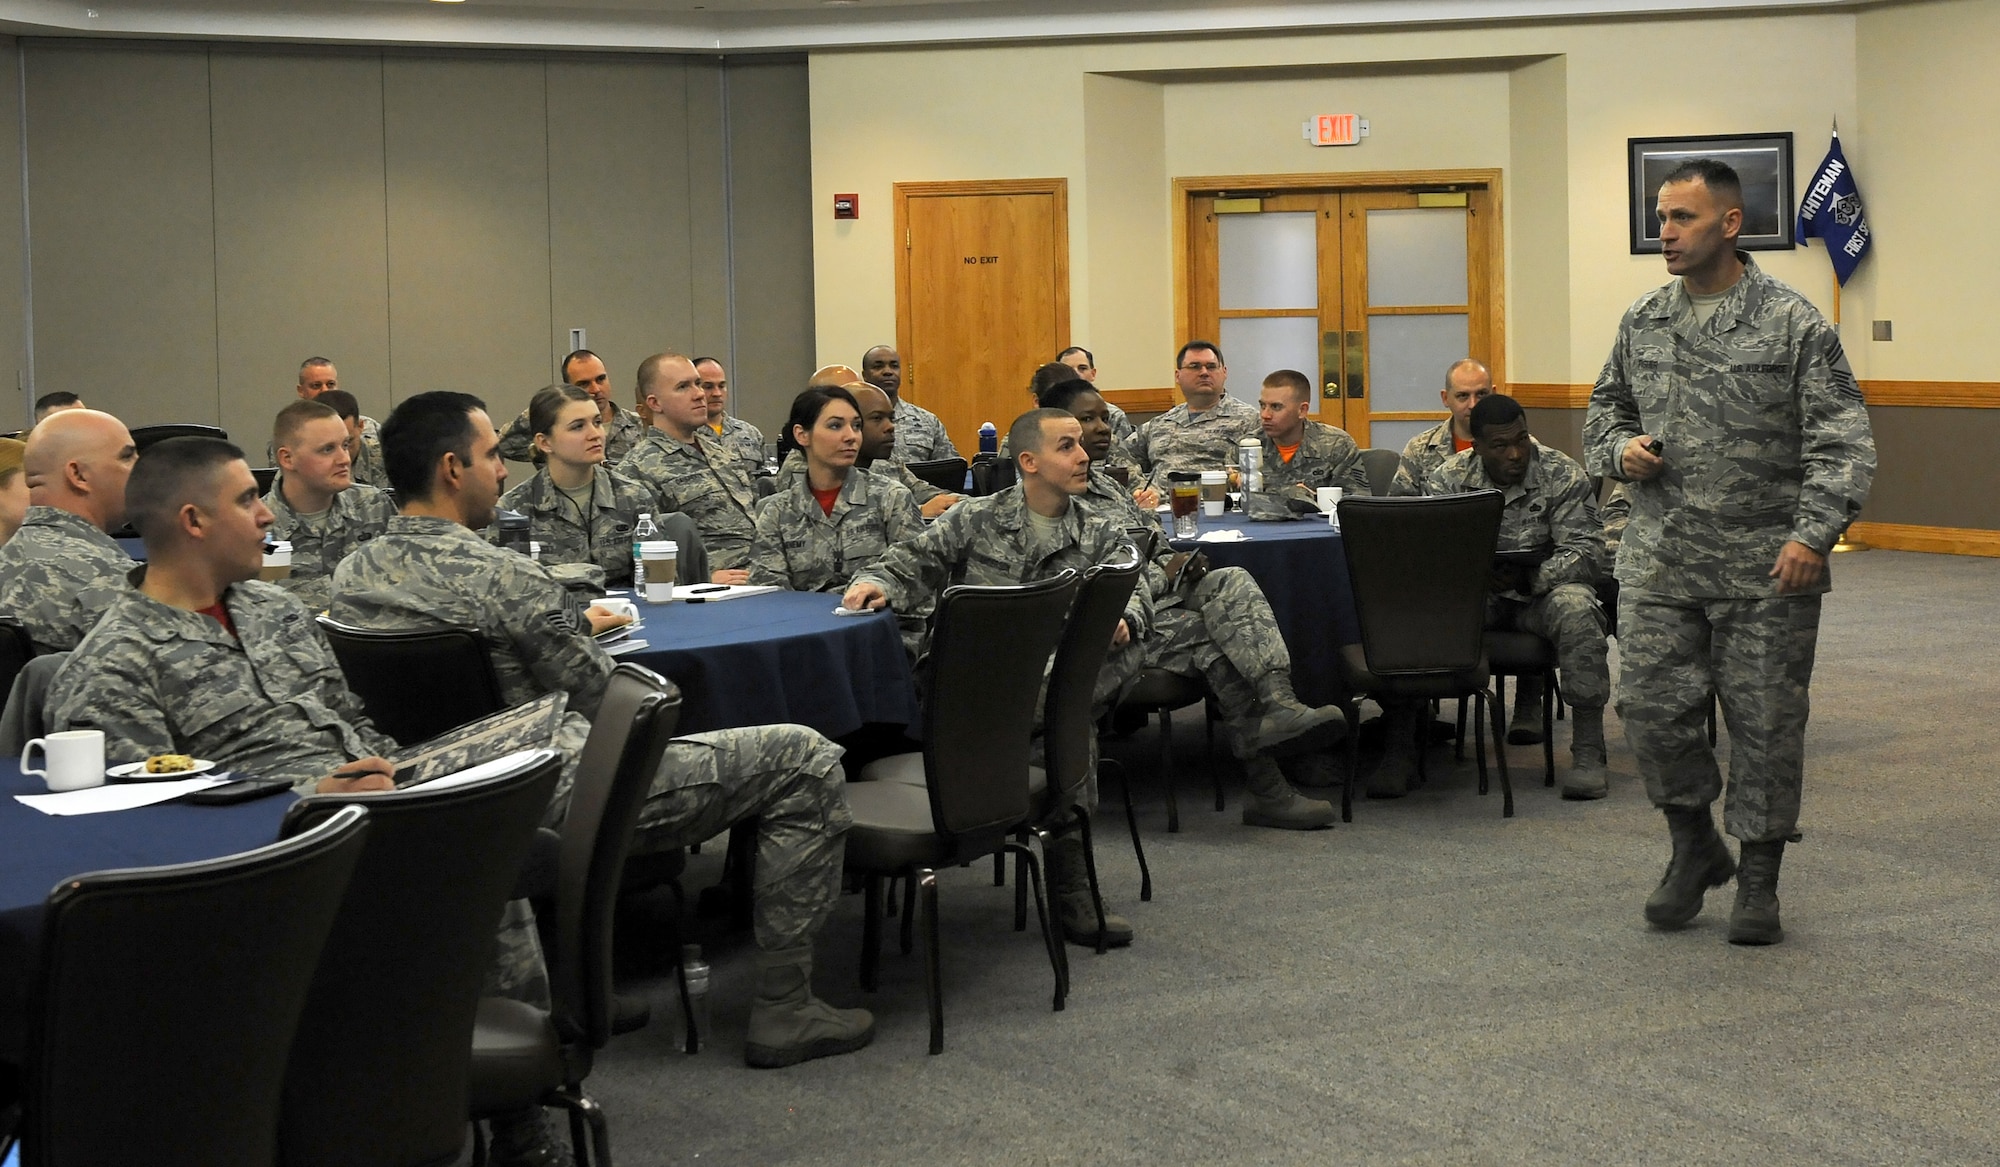 U.S. Air Force Chief Master Sgt. Anthony Fisher, the superintendent of Profession of Arms Center of Excellence (PACE), briefs senior enlisted leaders during PACE training at Whiteman Air Force Base, Mo., March 4, 2016. The training included tips on bridging the Air Force core values and its mission to accomplish a higher level of professionalism through trust, loyalty and commitment. (U.S. Air Force photo by Airman 1st Class Michaela R. Slanchik)